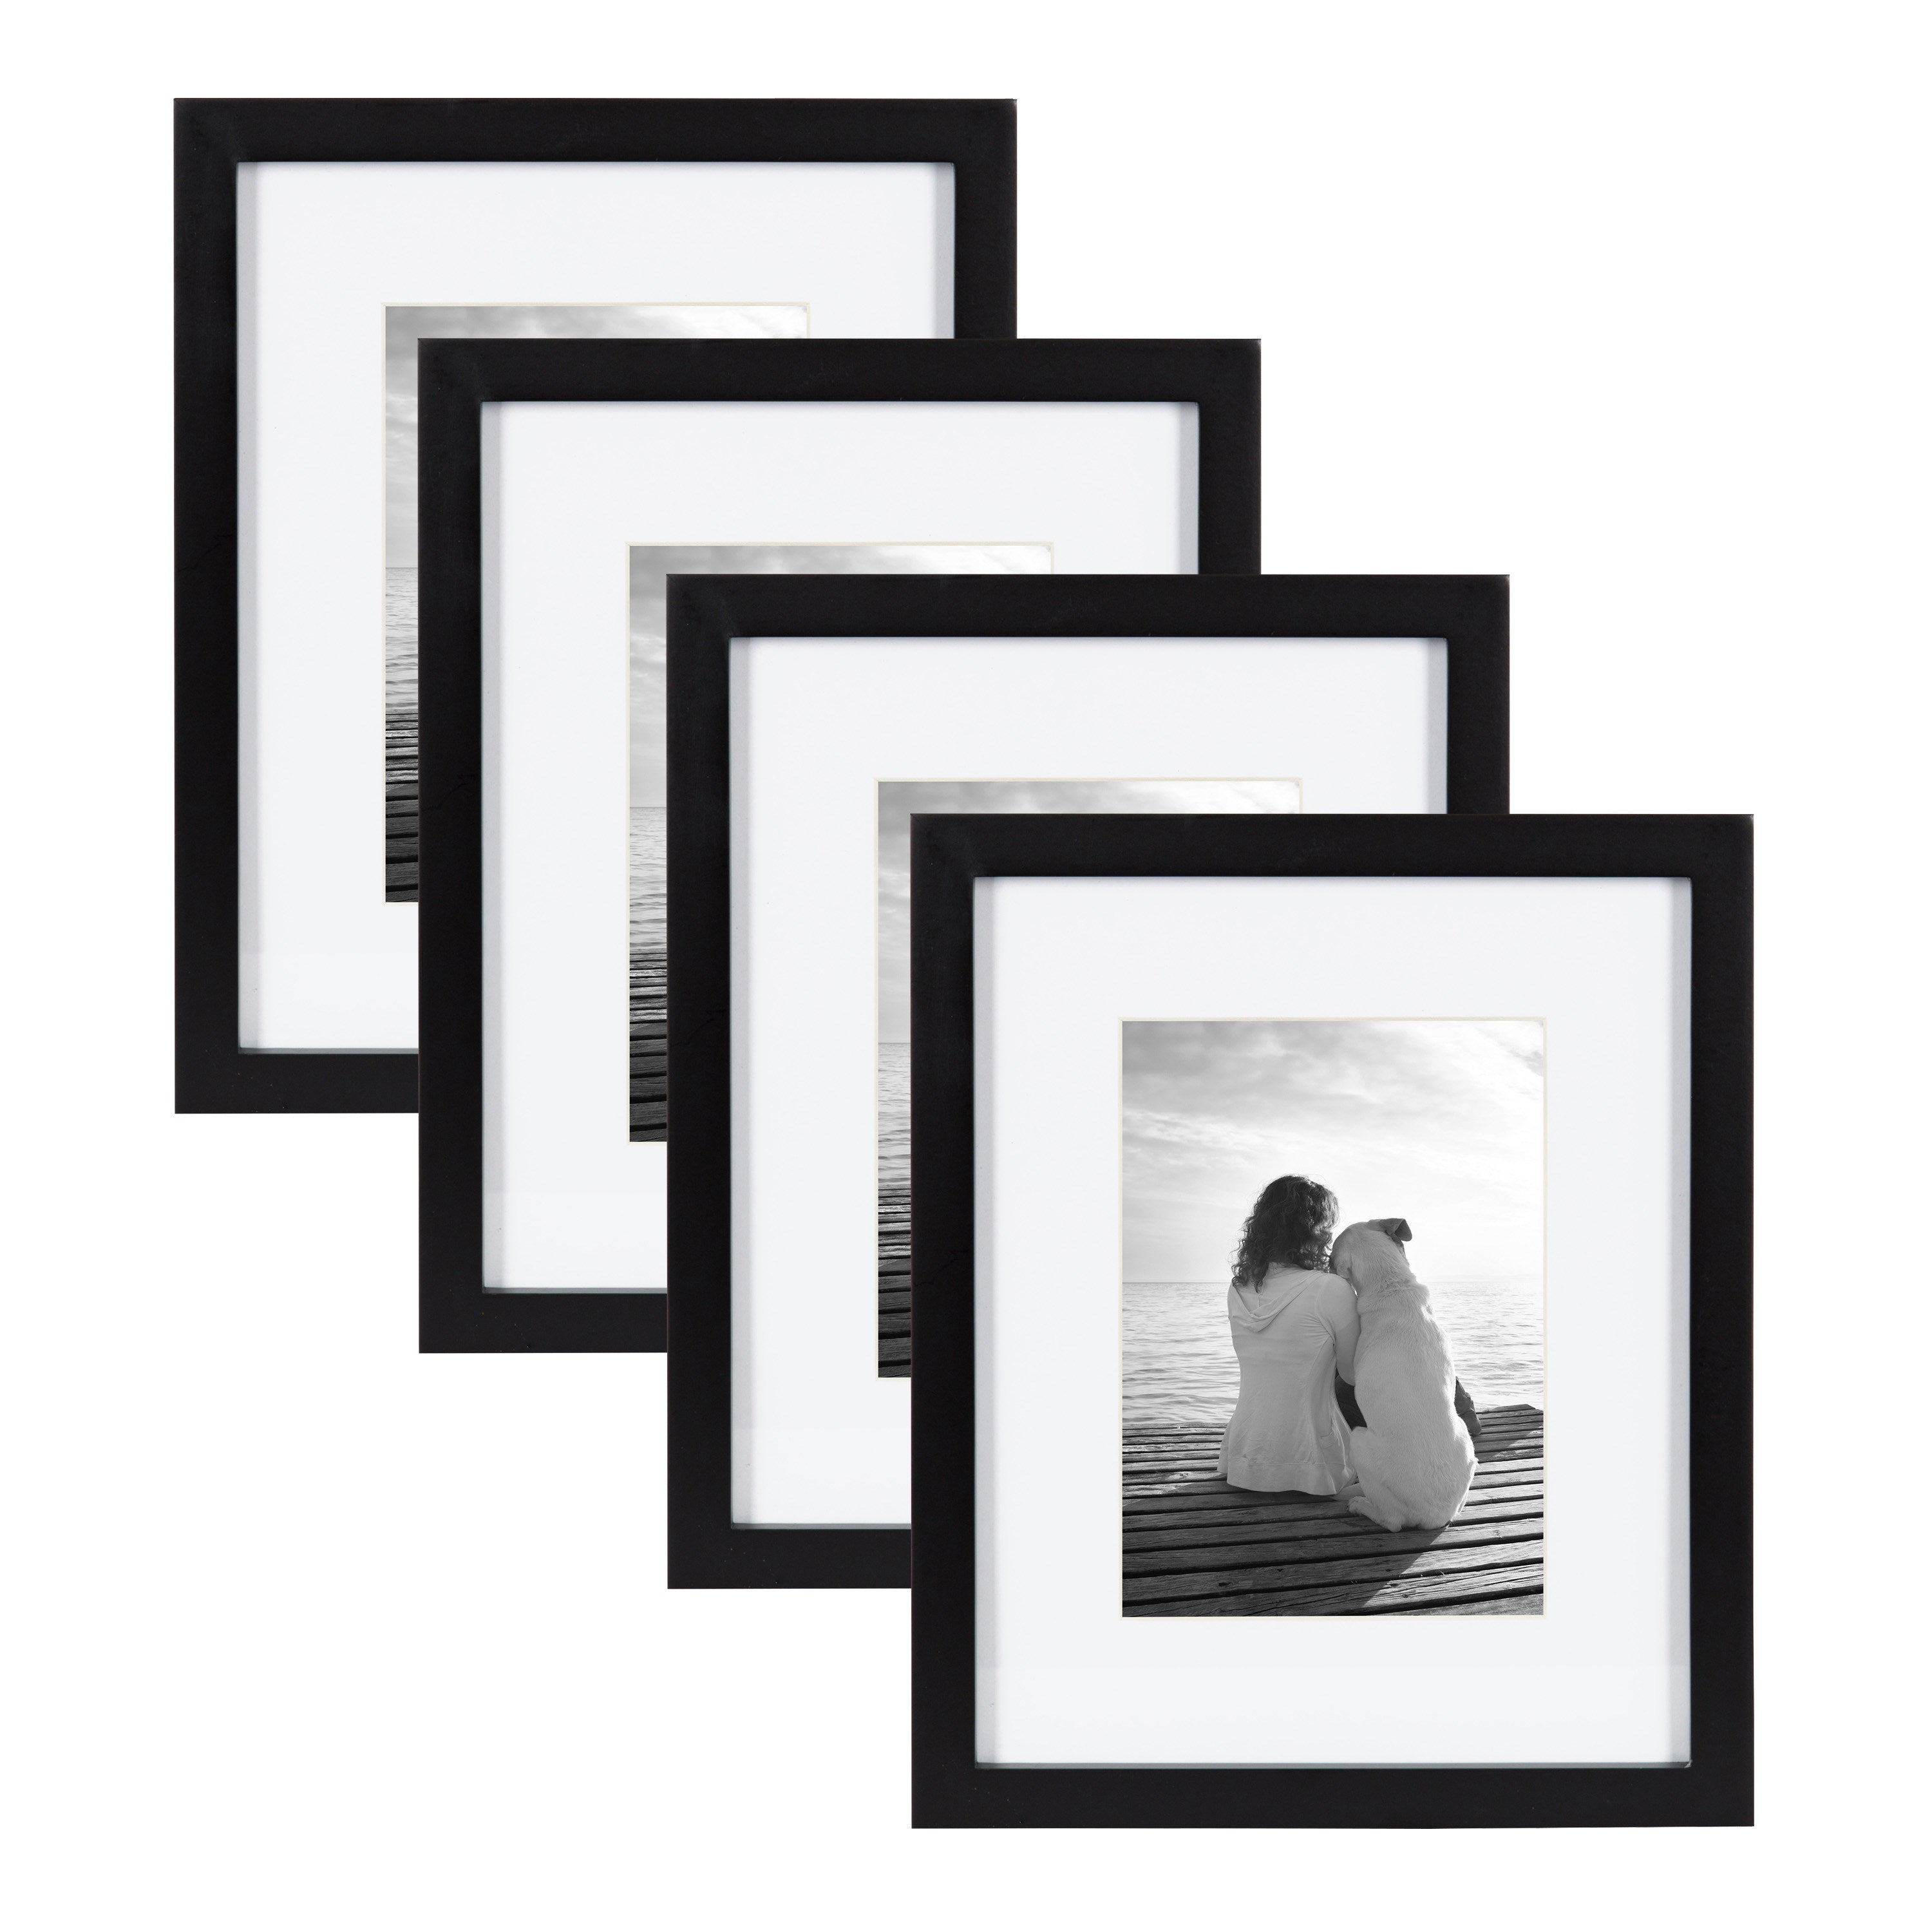 Walnut Wood Wall Frame 8x10 matted to 5x7 by Gallery Solutions™ - Picture  Frames, Photo Albums, Personalized and Engraved Digital Photo Gifts -  SendAFrame